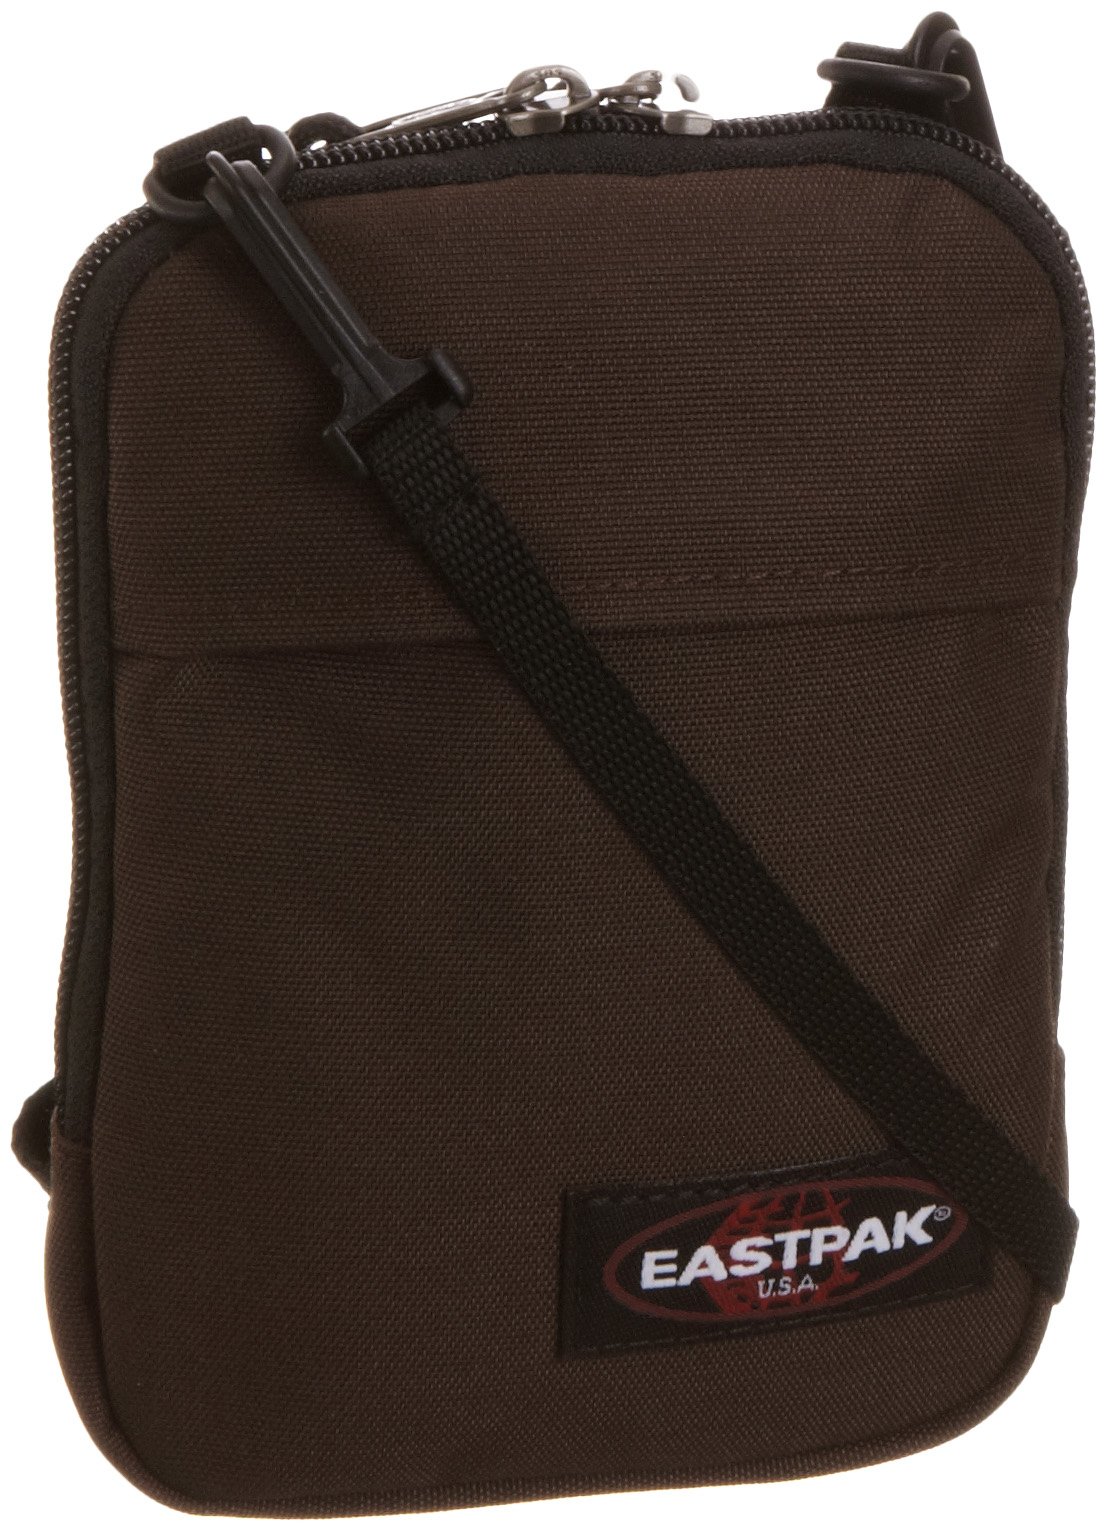 Tracollina Eastpak buddy back to brown